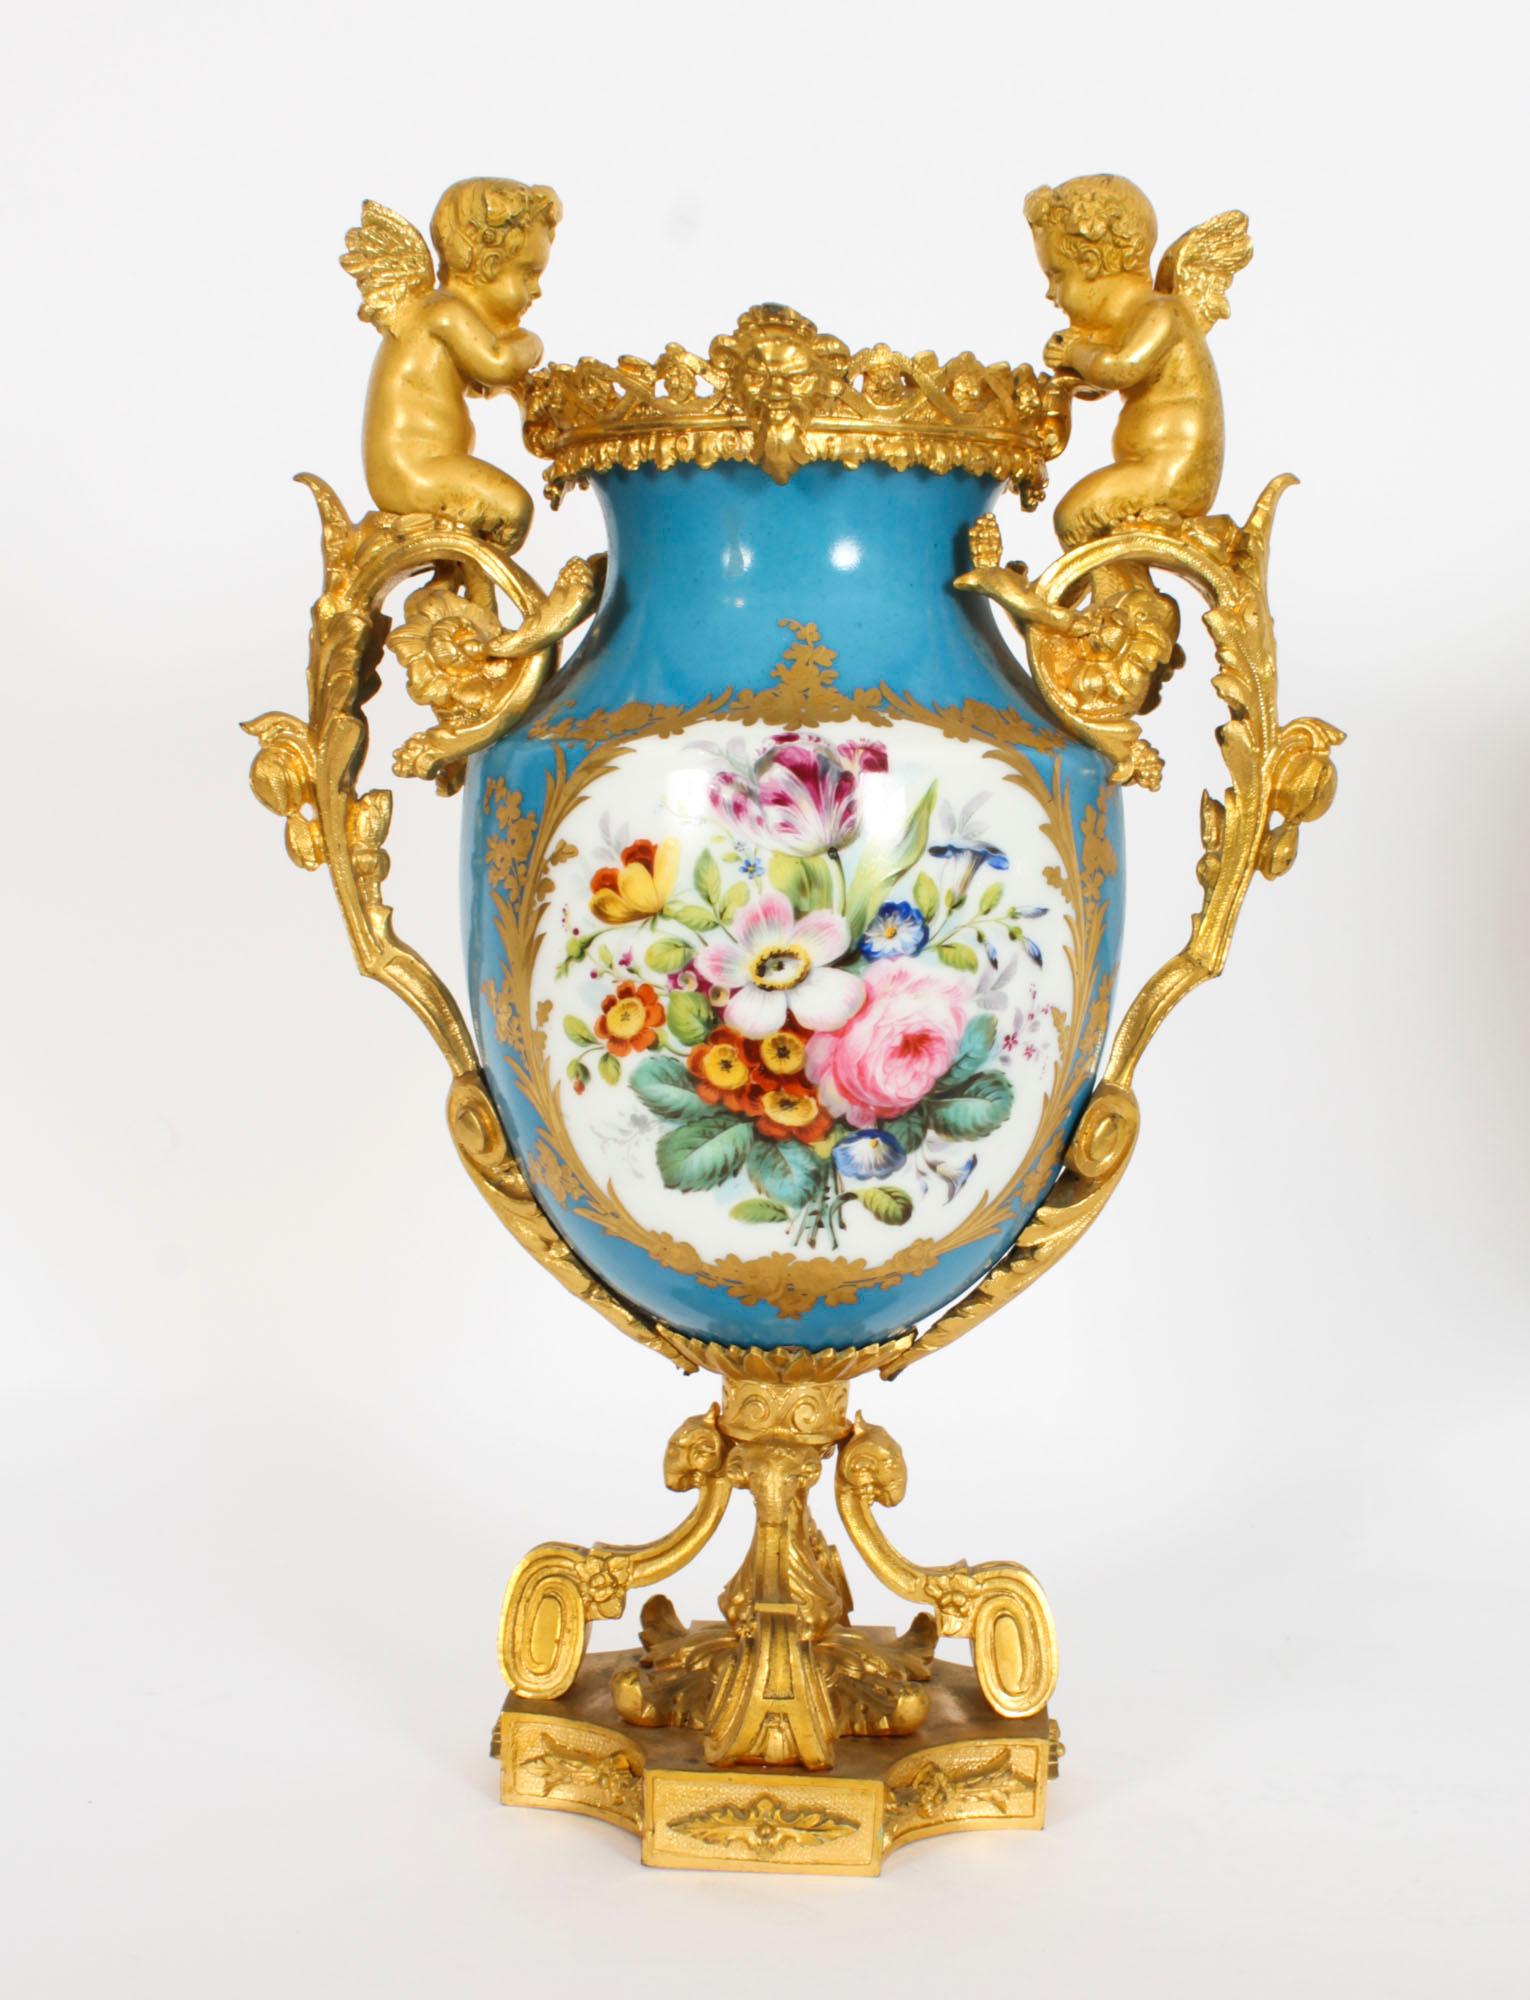 This is a stunning pair of French twin handle ormolu garniture urns with Sevres hand painted porcelain, circa 1870 in date.

The urns are decorated in the Sevres manner with panels of cherubs and bouquets of flowers reserved on a blue ground, the